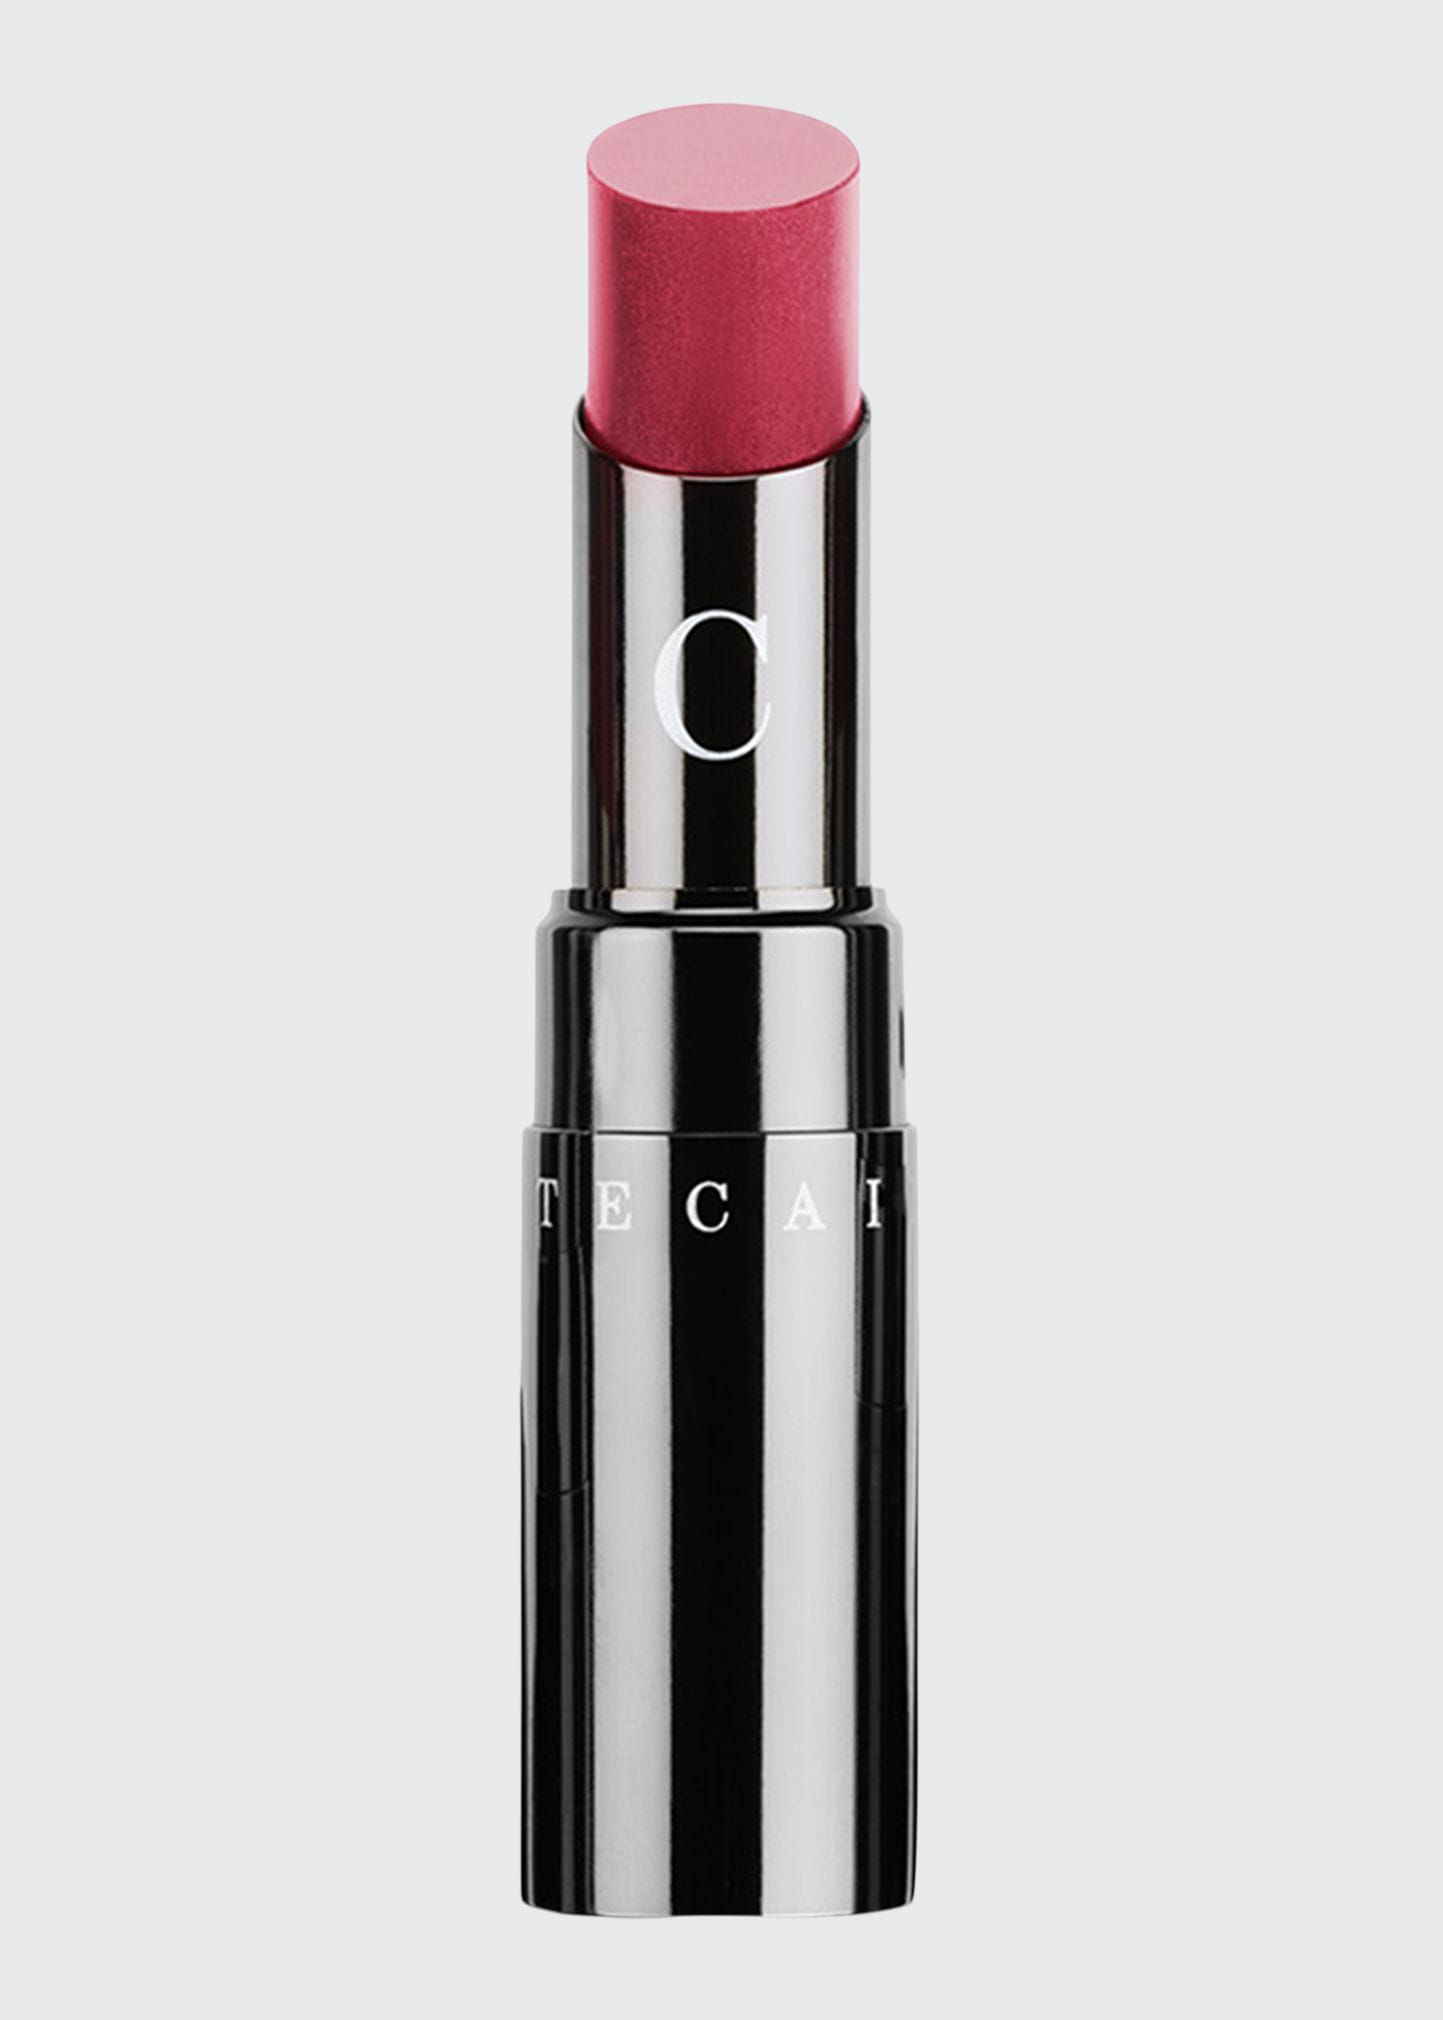 Chantecaille Lip Chic Lipstick In Gypsy Rose